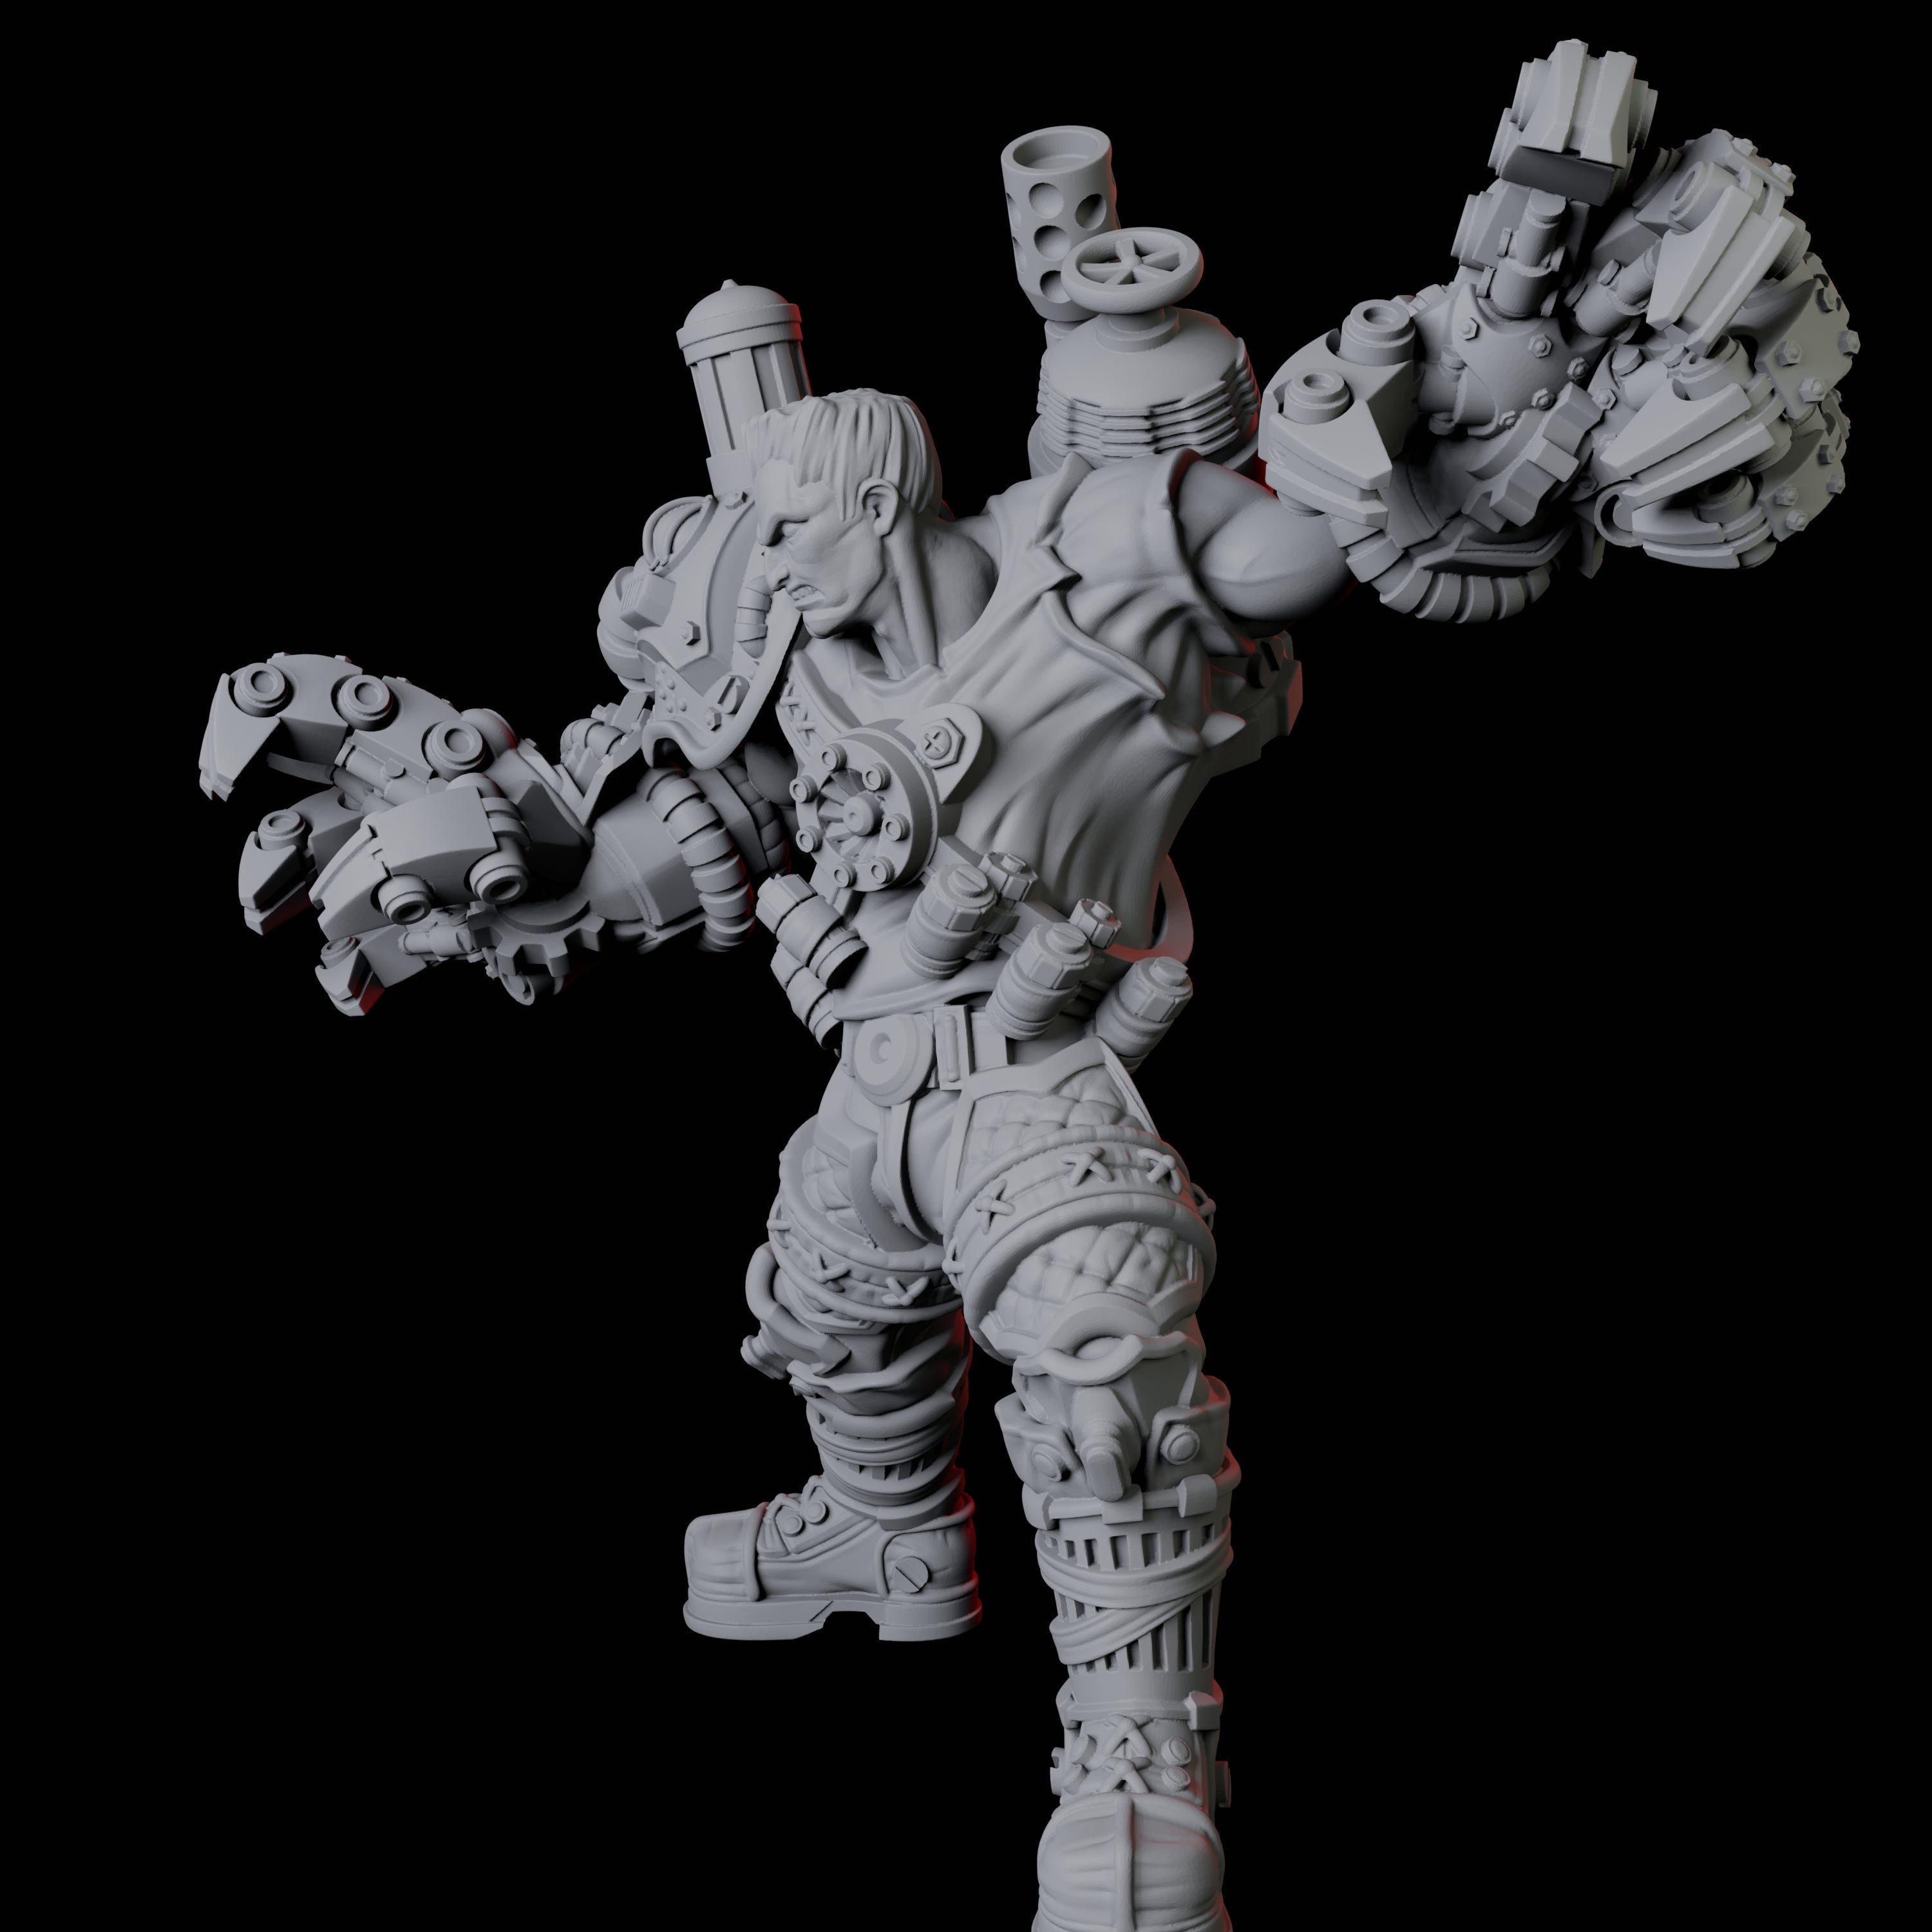 Goliath Cyborg Miniature for Dungeons and Dragons